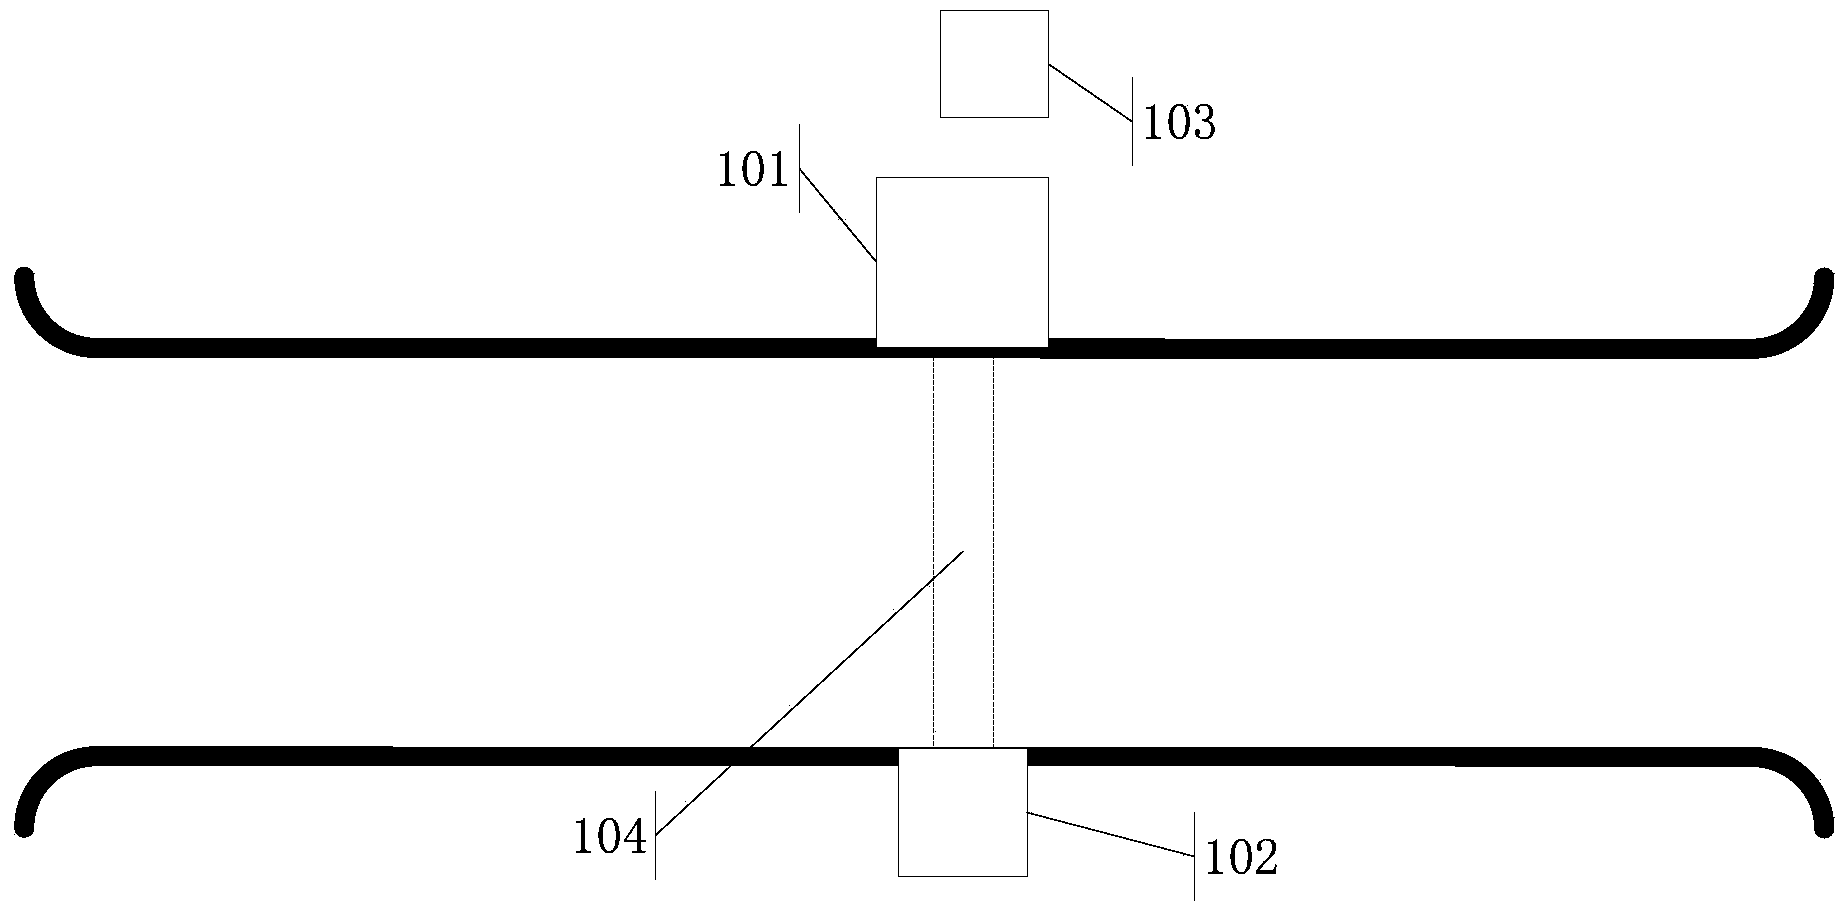 Continuous pass-type radiation scanning system and method